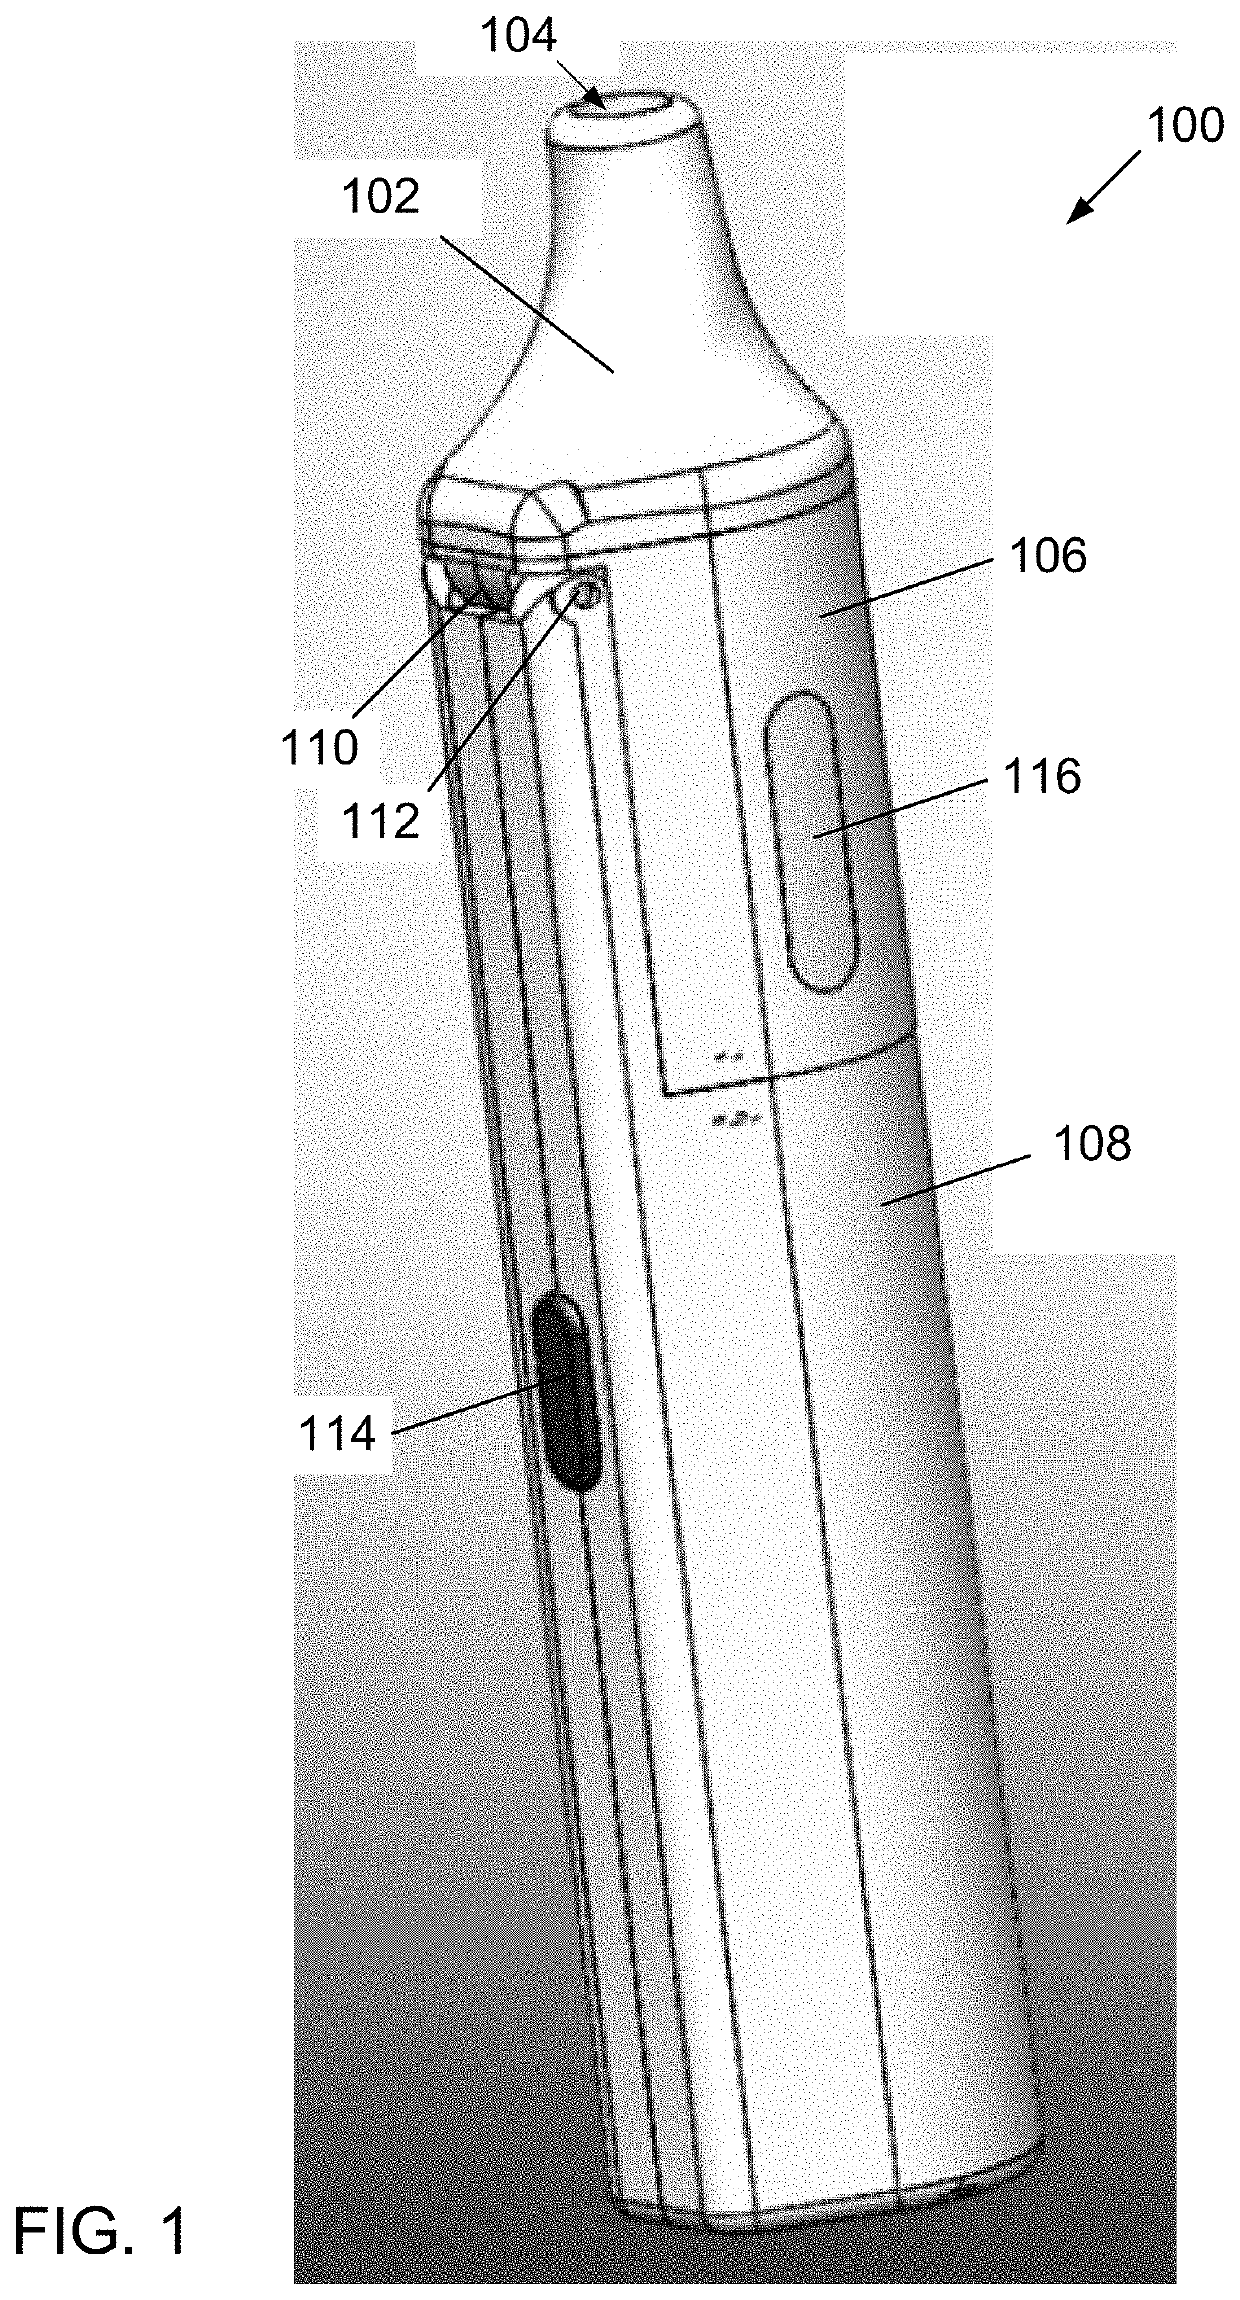 Liquid-filled cartridge for electronic device that produces an aerosol for inhalation by a person